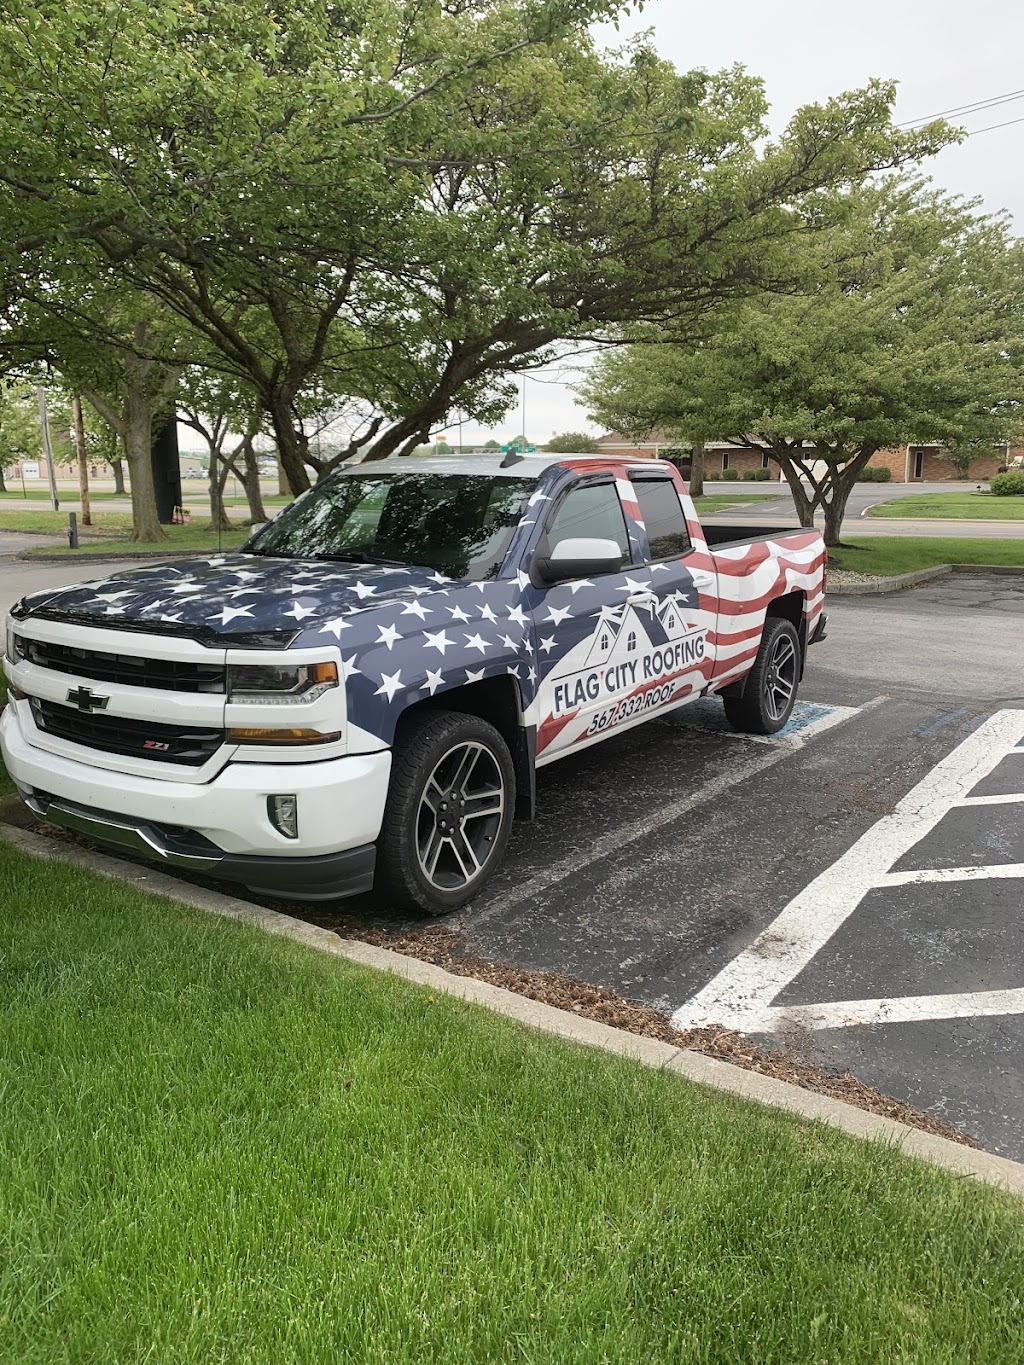 Flag City Roofing LLC | 1971 Broad Ave, Findlay, OH 45840 | Phone: (567) 332-7663